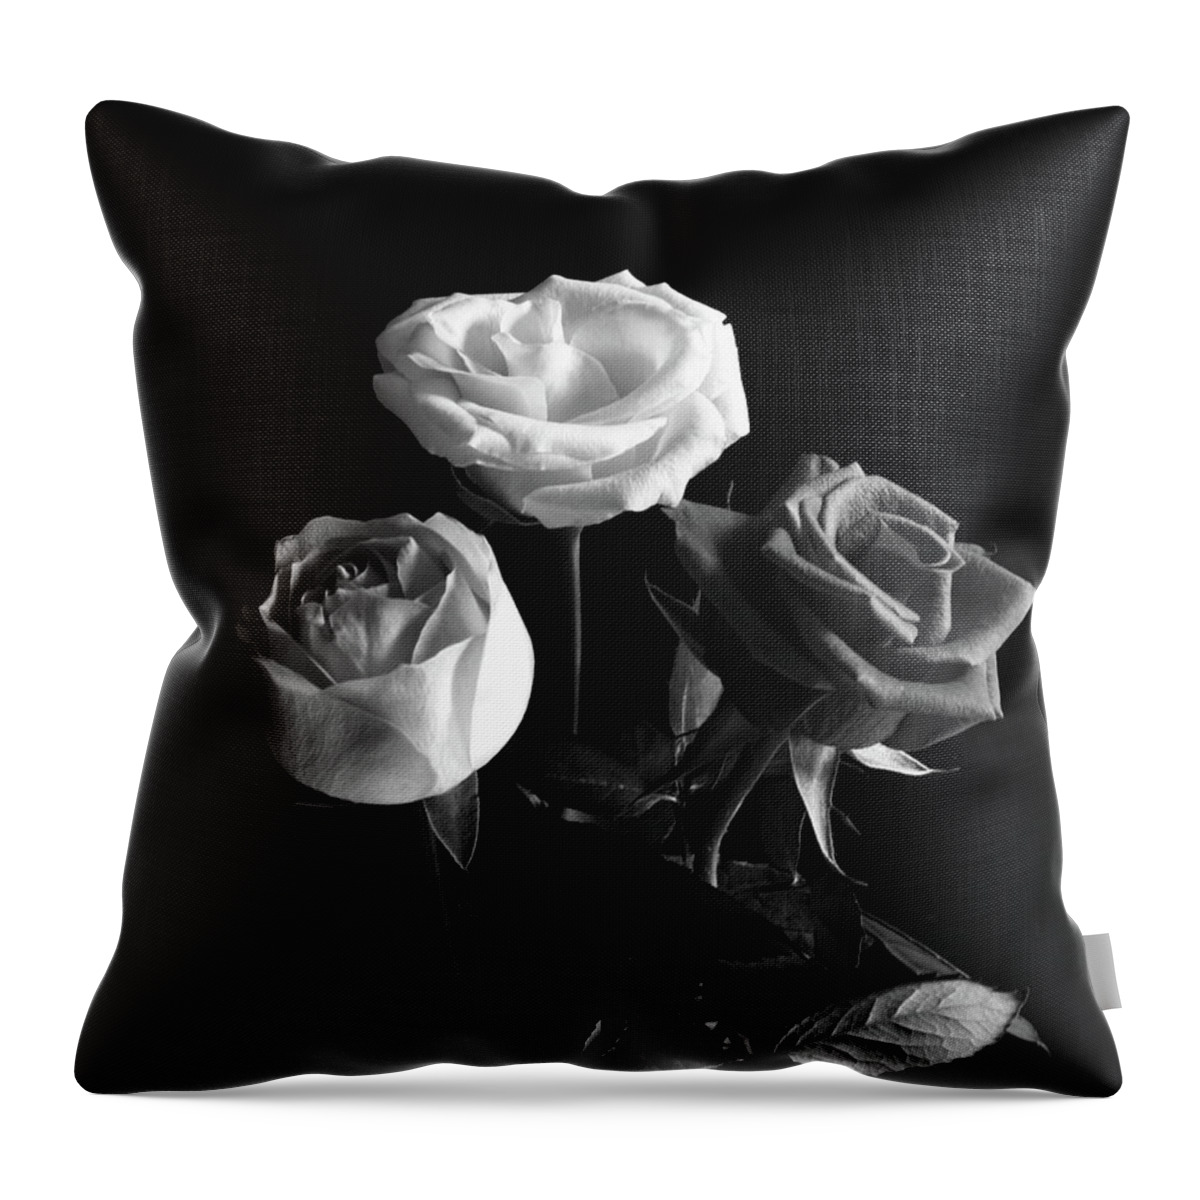 Three Roses Throw Pillow featuring the photograph Three Roses Monochrome by Jeff Townsend